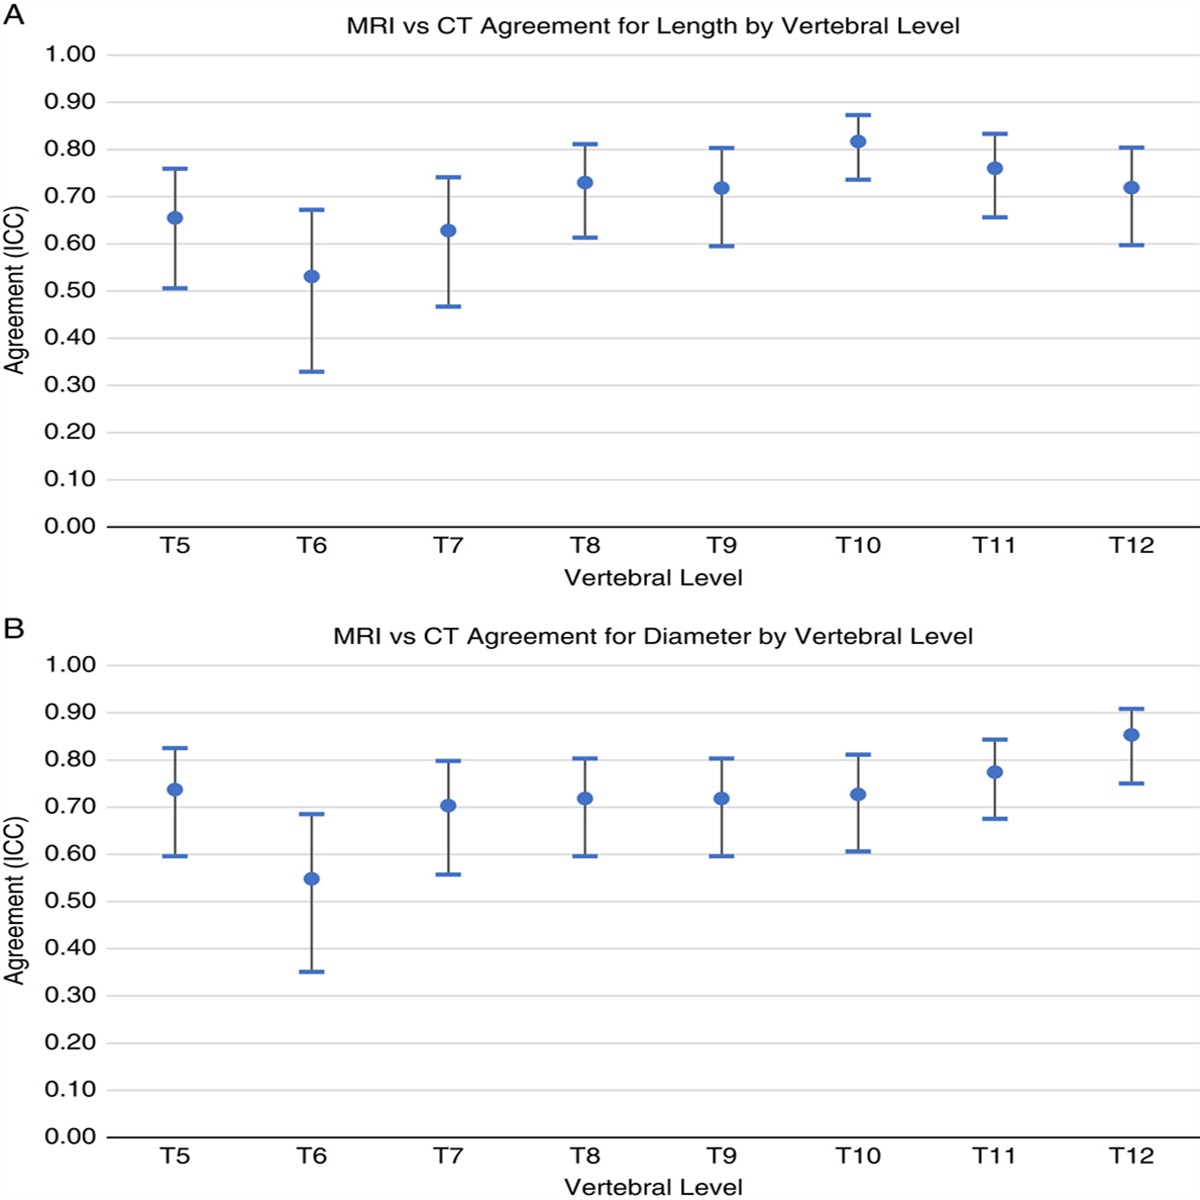 Preoperative MRI Reliably Predicts Pedicle Dimensions on Intraoperative CT Images in Structural Main Thoracic Curves in Patients With Adolescent Idiopathic Scoliosis